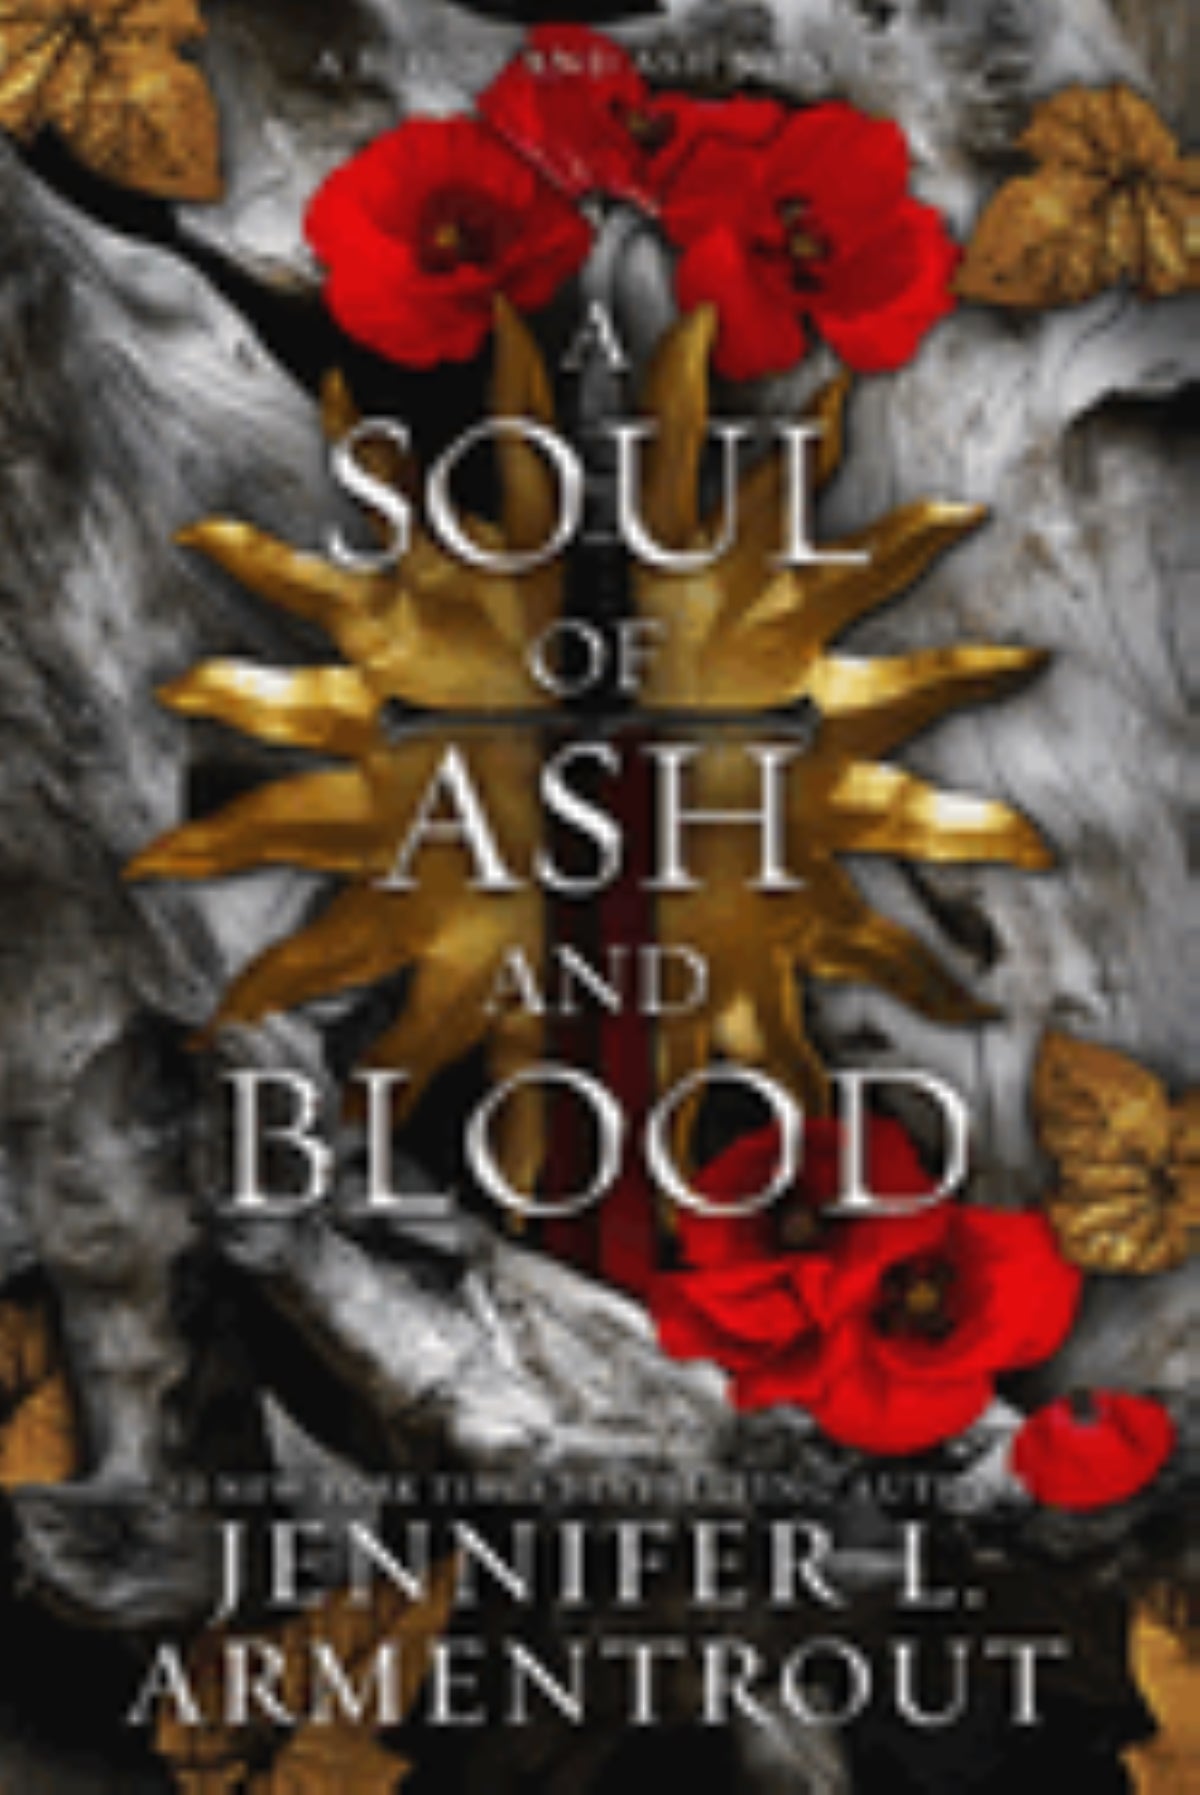 A Soul of Ash and Blood 
by Jennifer L. Armentrout